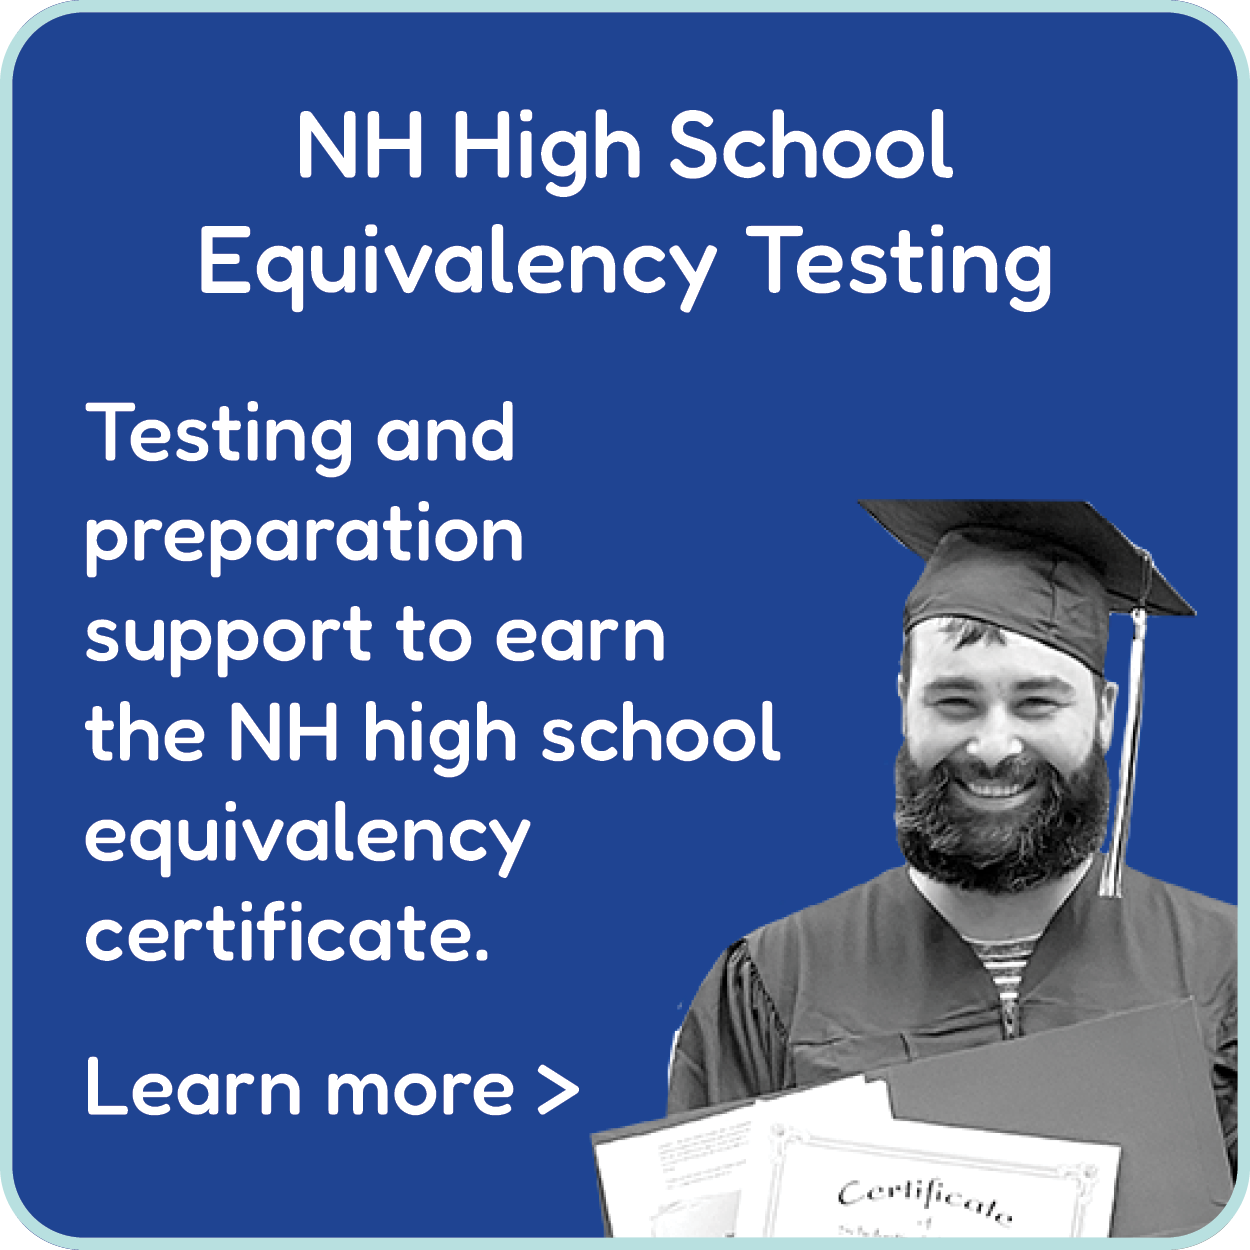 Learn more about testing and preparation support to earn the NH high school equivalency